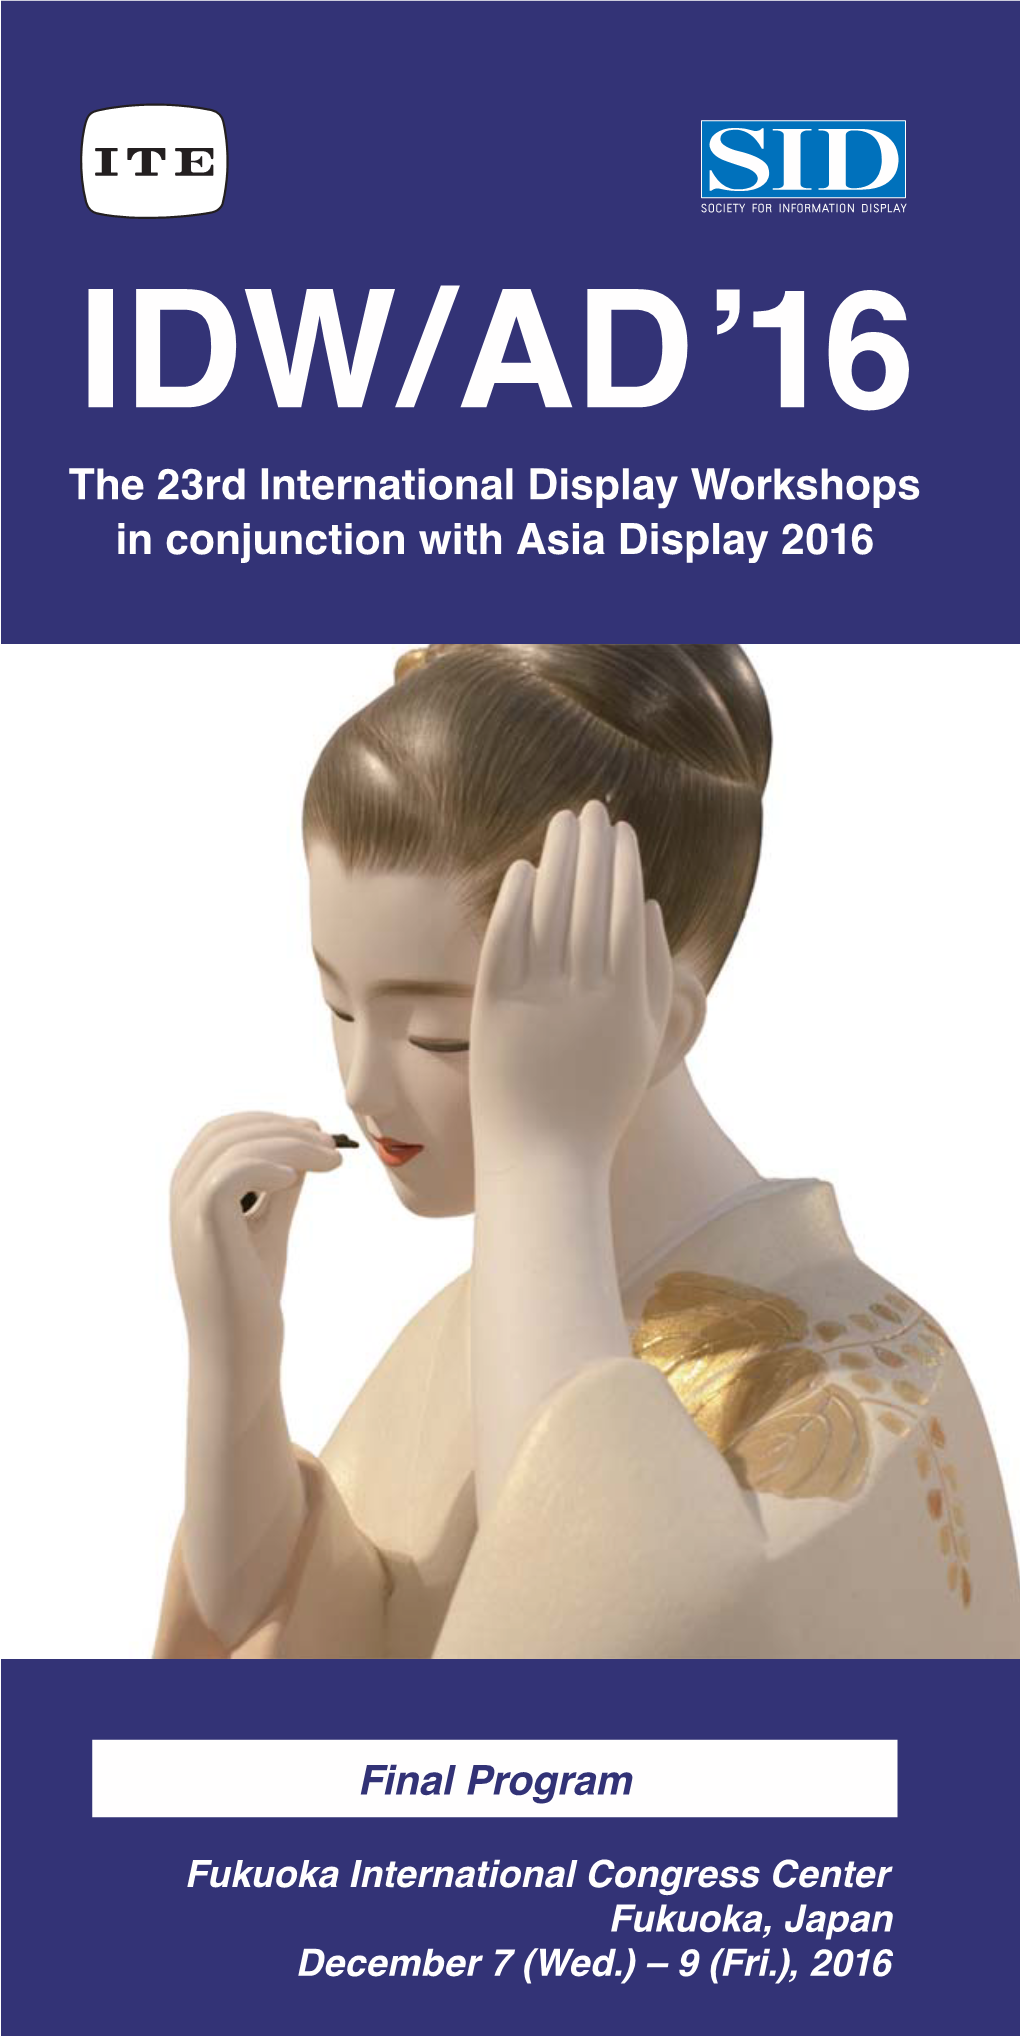 IDW/AD ·16 the 23Rd International Display Workshops in Conjunction with Asia Display 2016